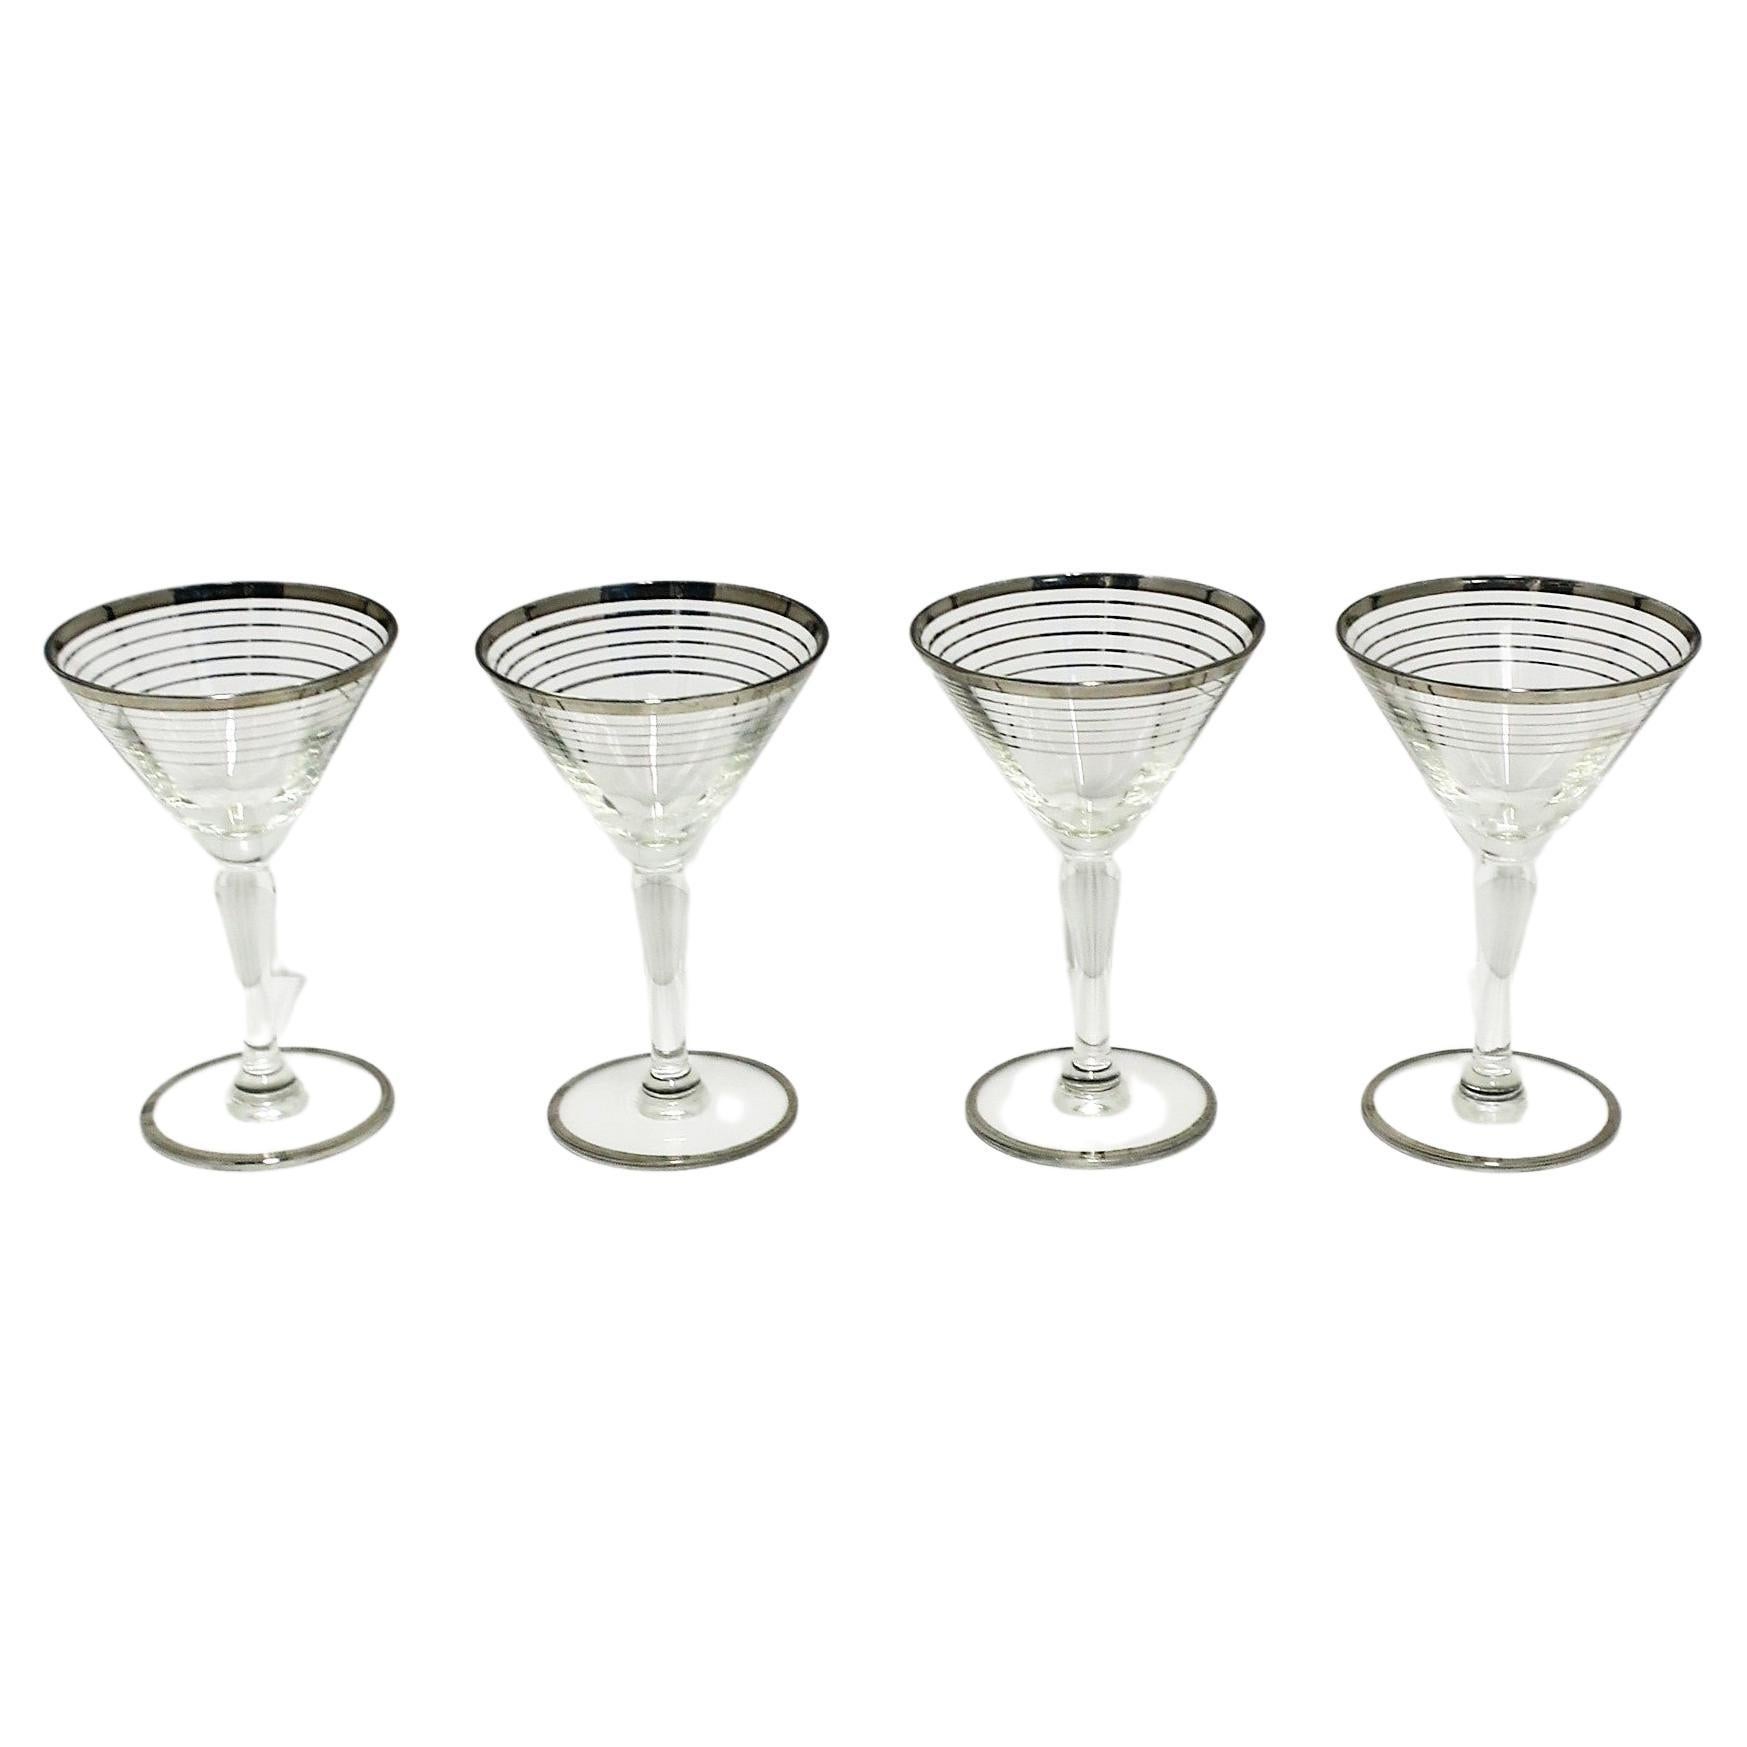 Mid-Century Modern Cocktail or Martini Glasses, Set of 4